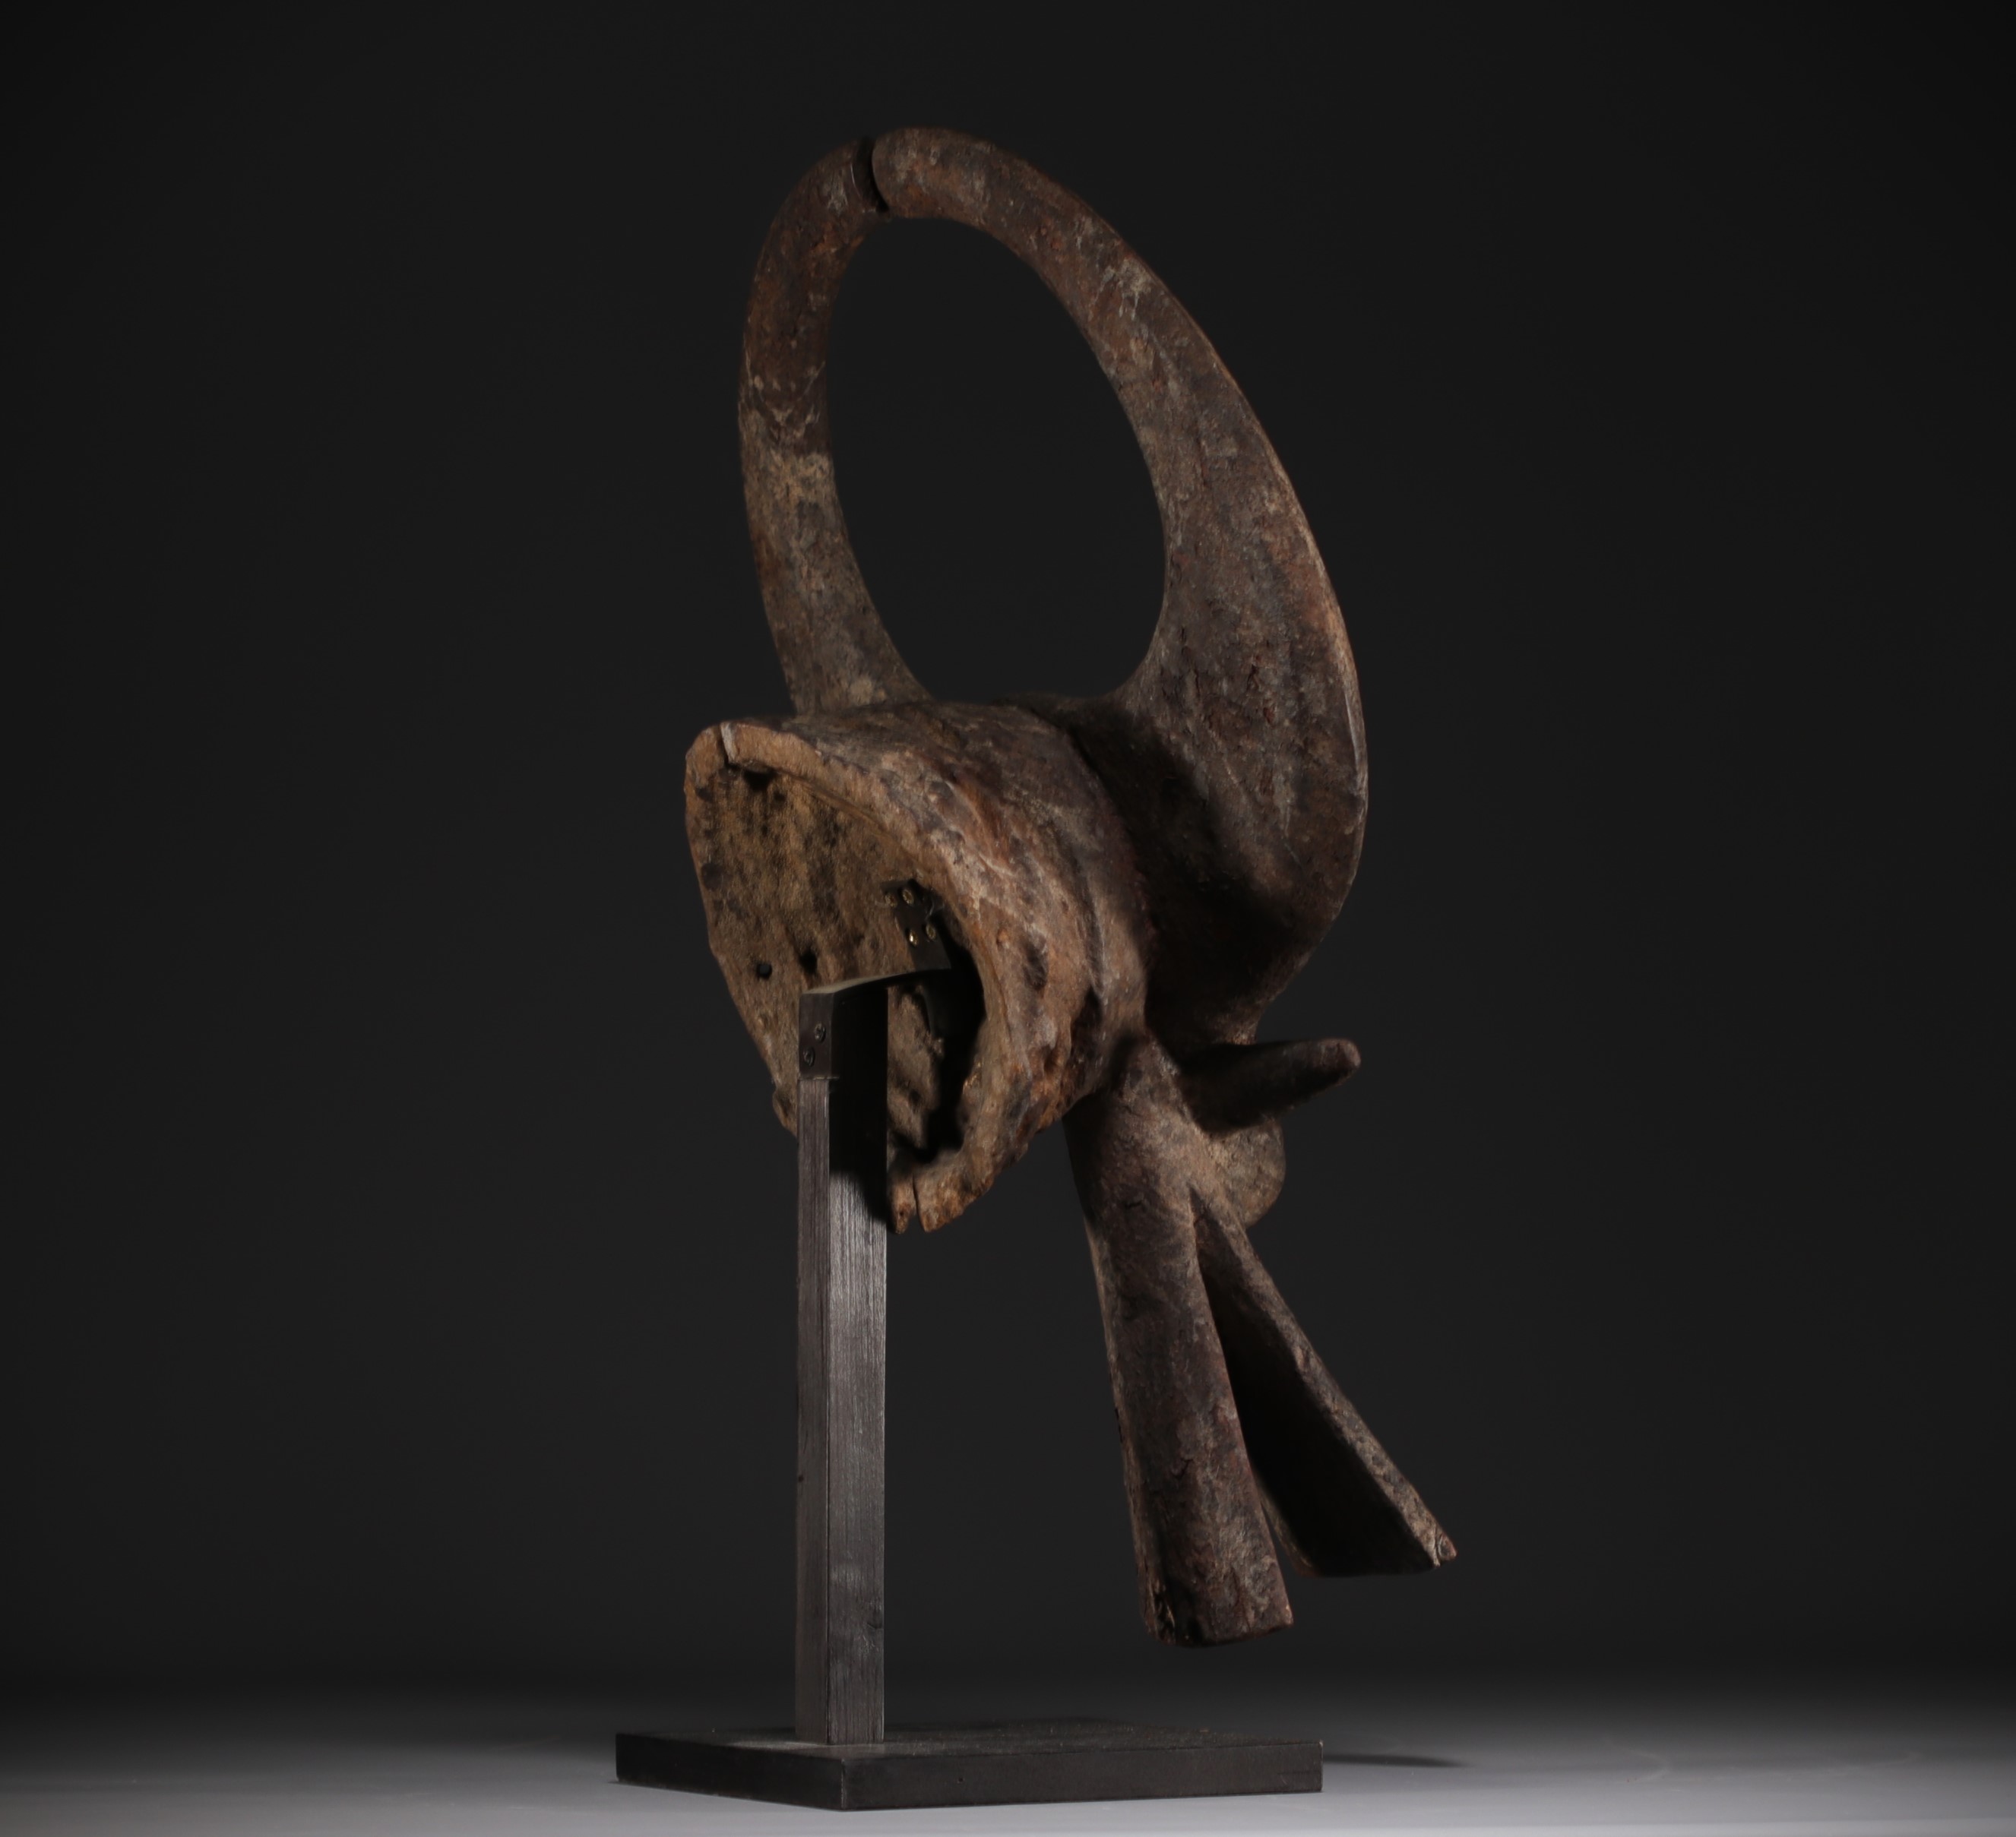 Nigeria - MAMA mask, stylised representation of an animal, Michel Boulanger Liege collection - Image 3 of 4